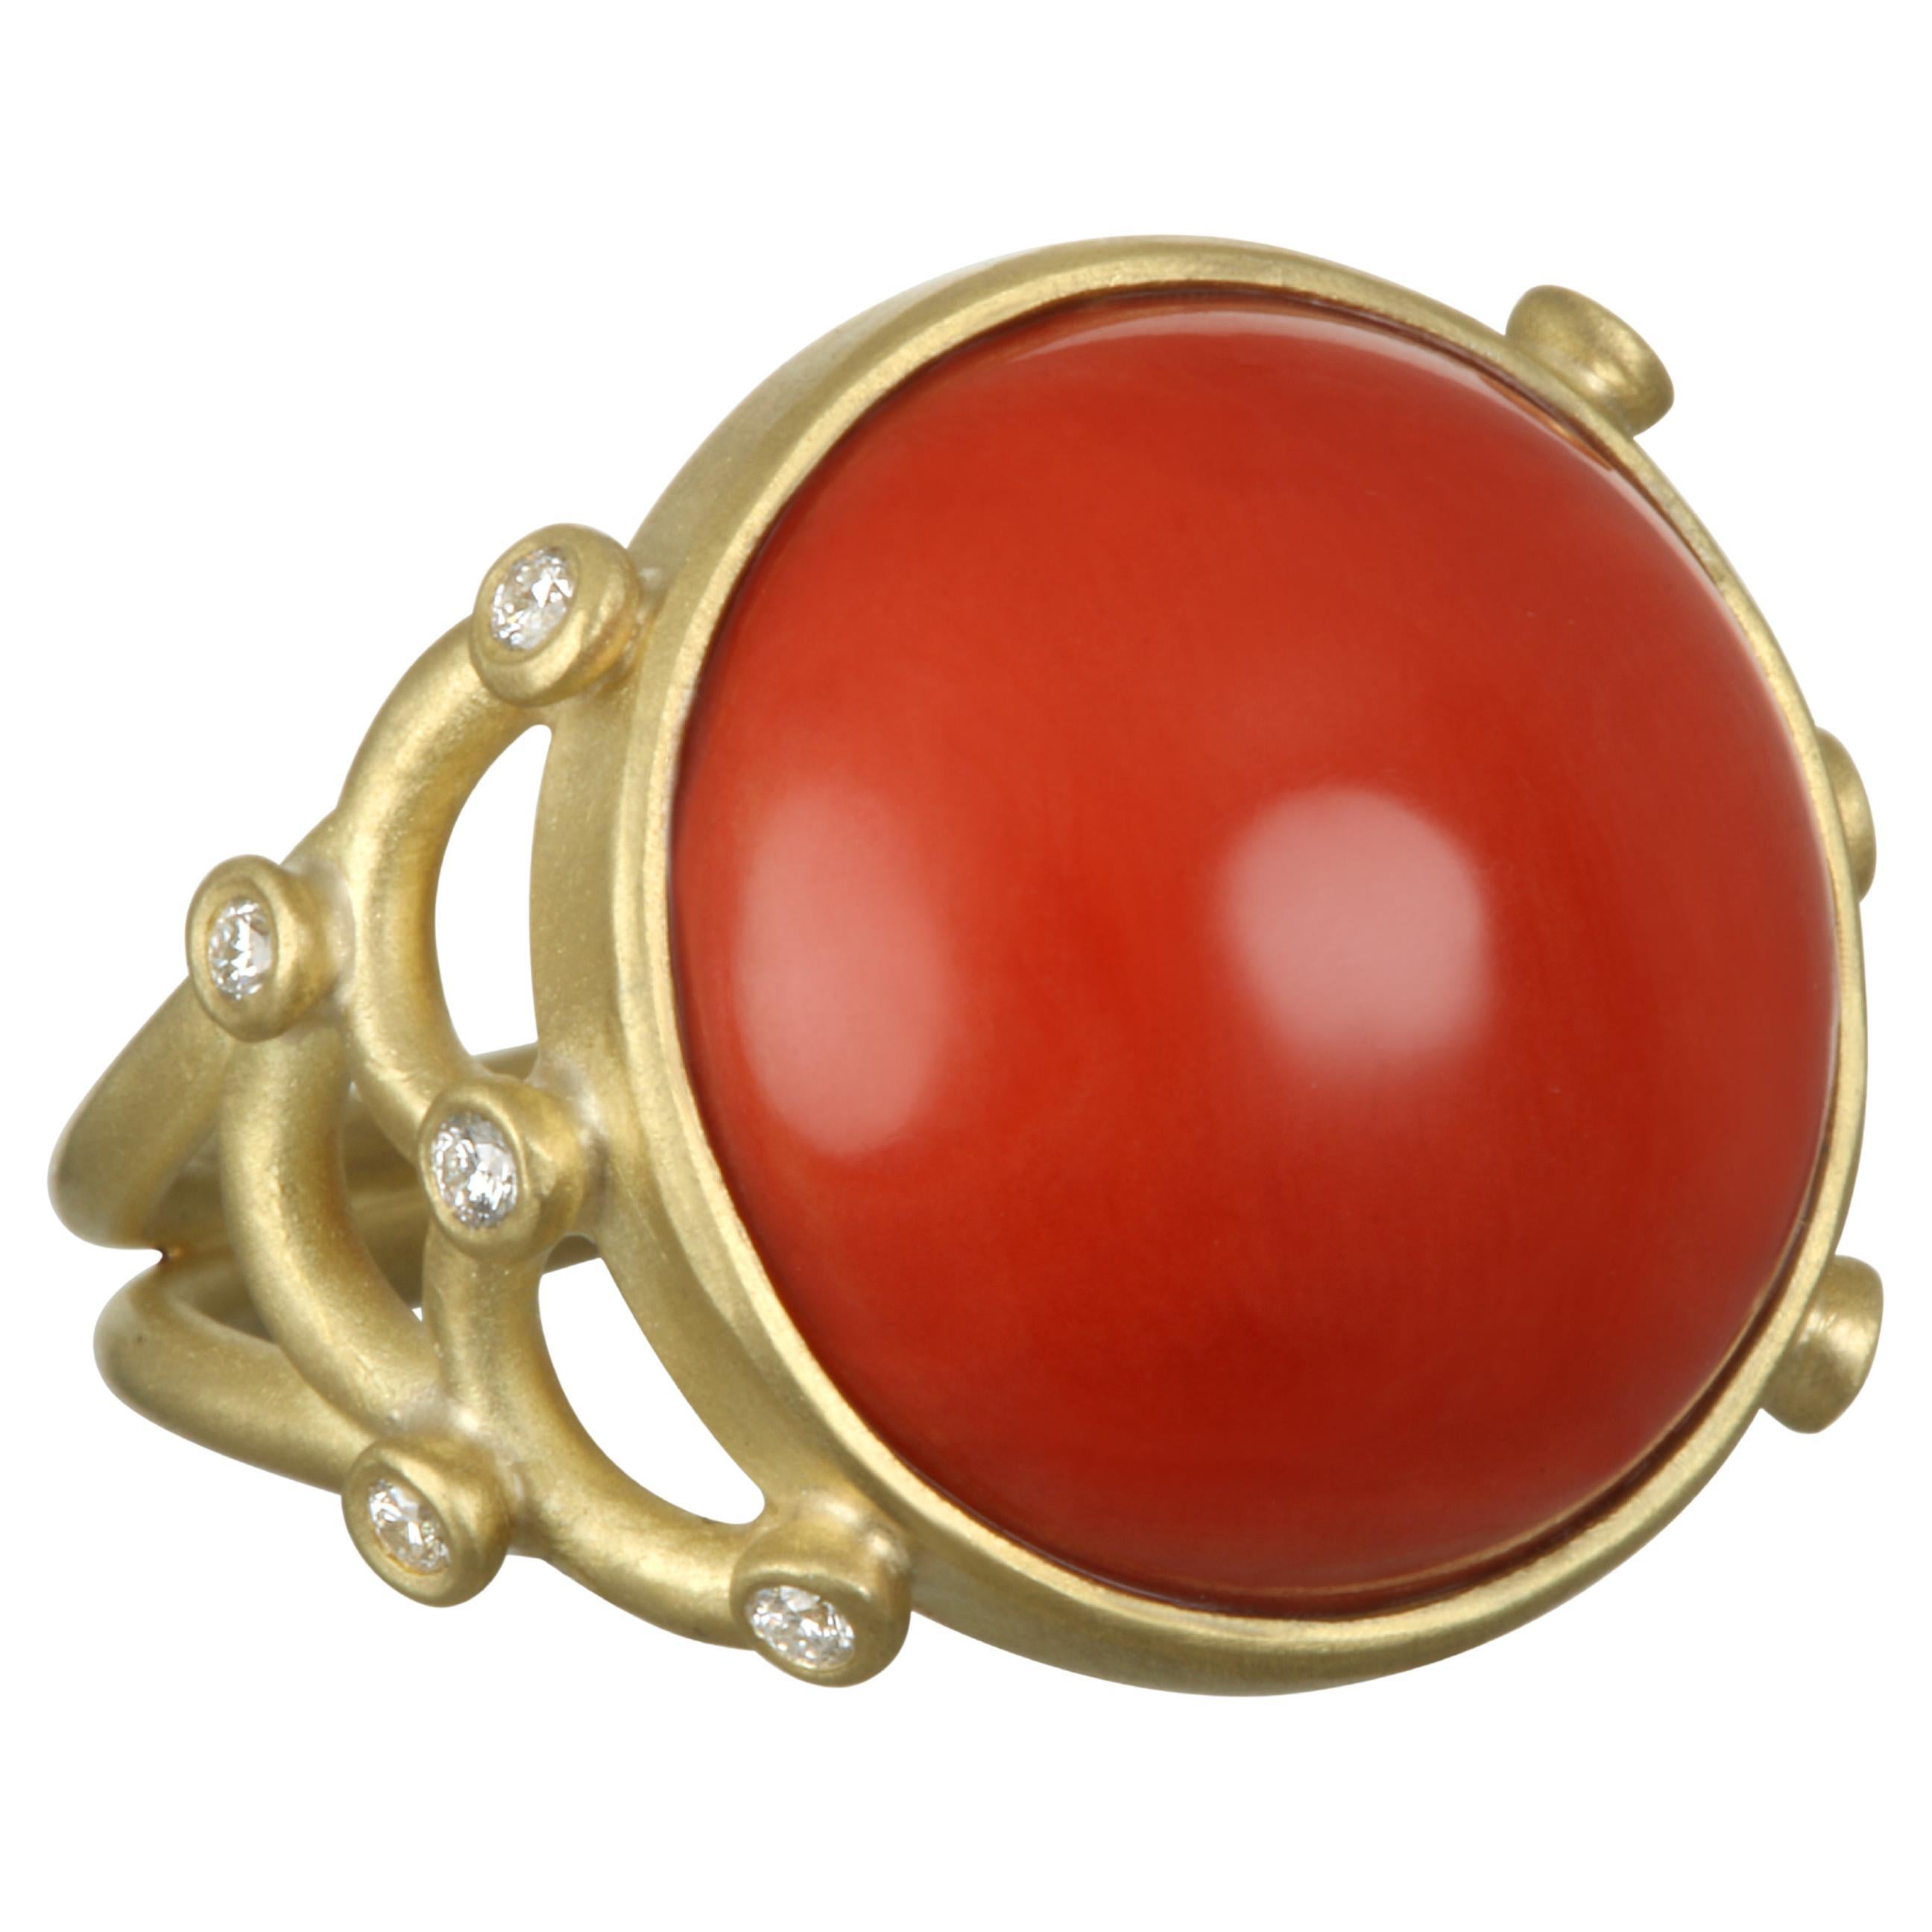 Cabochon Oval Genuine & Natural Red Coral 14K Solid Yellow Gold Ring | eBay